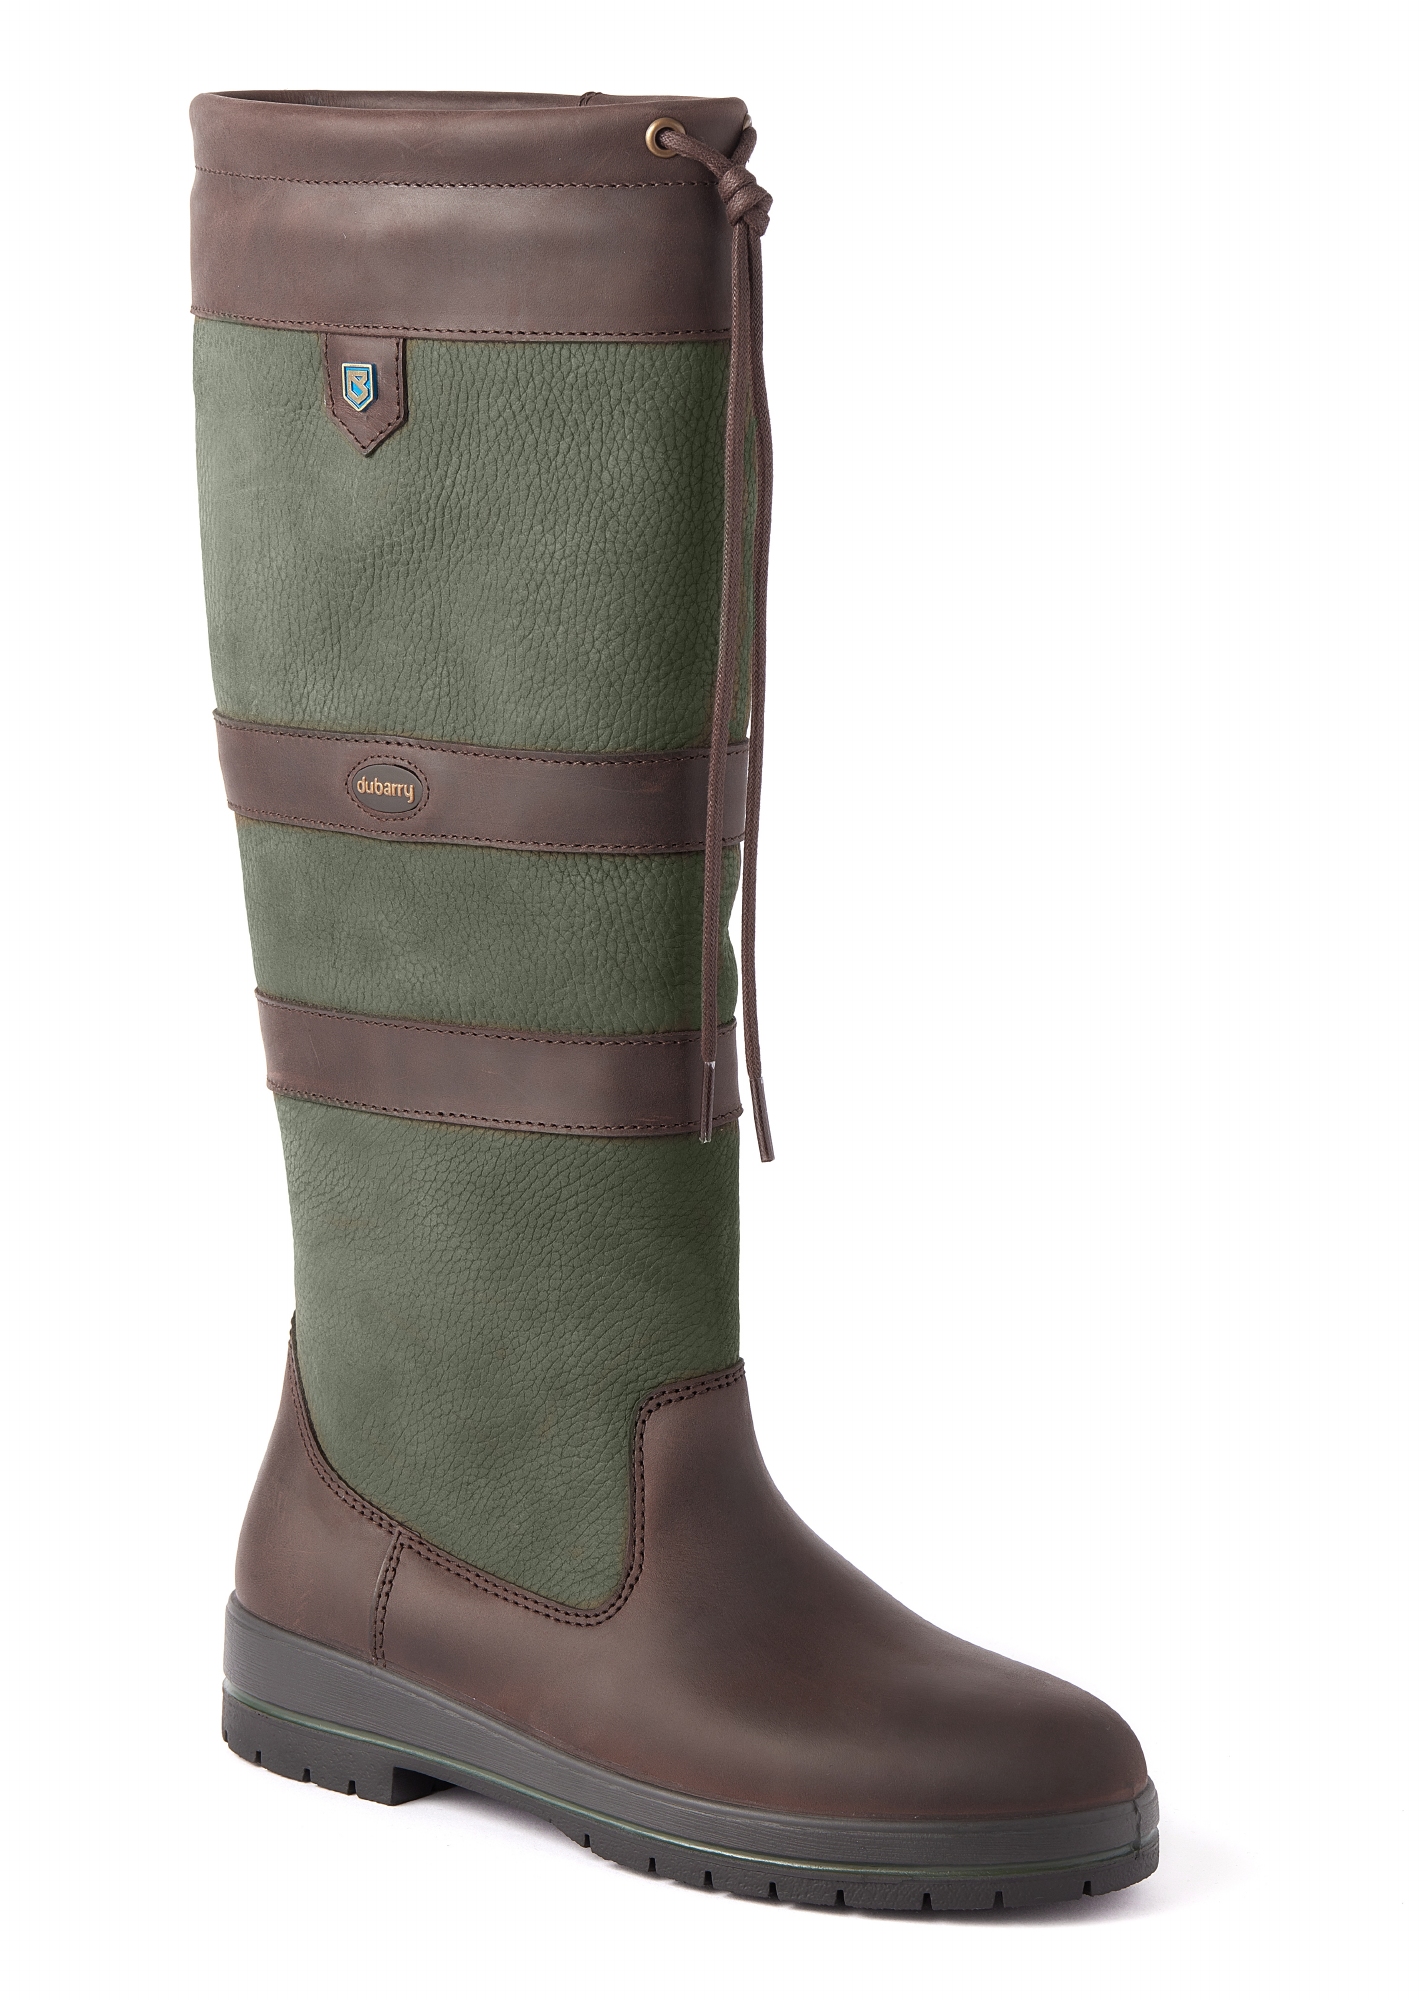 Dubarry® Galway Ivy Green